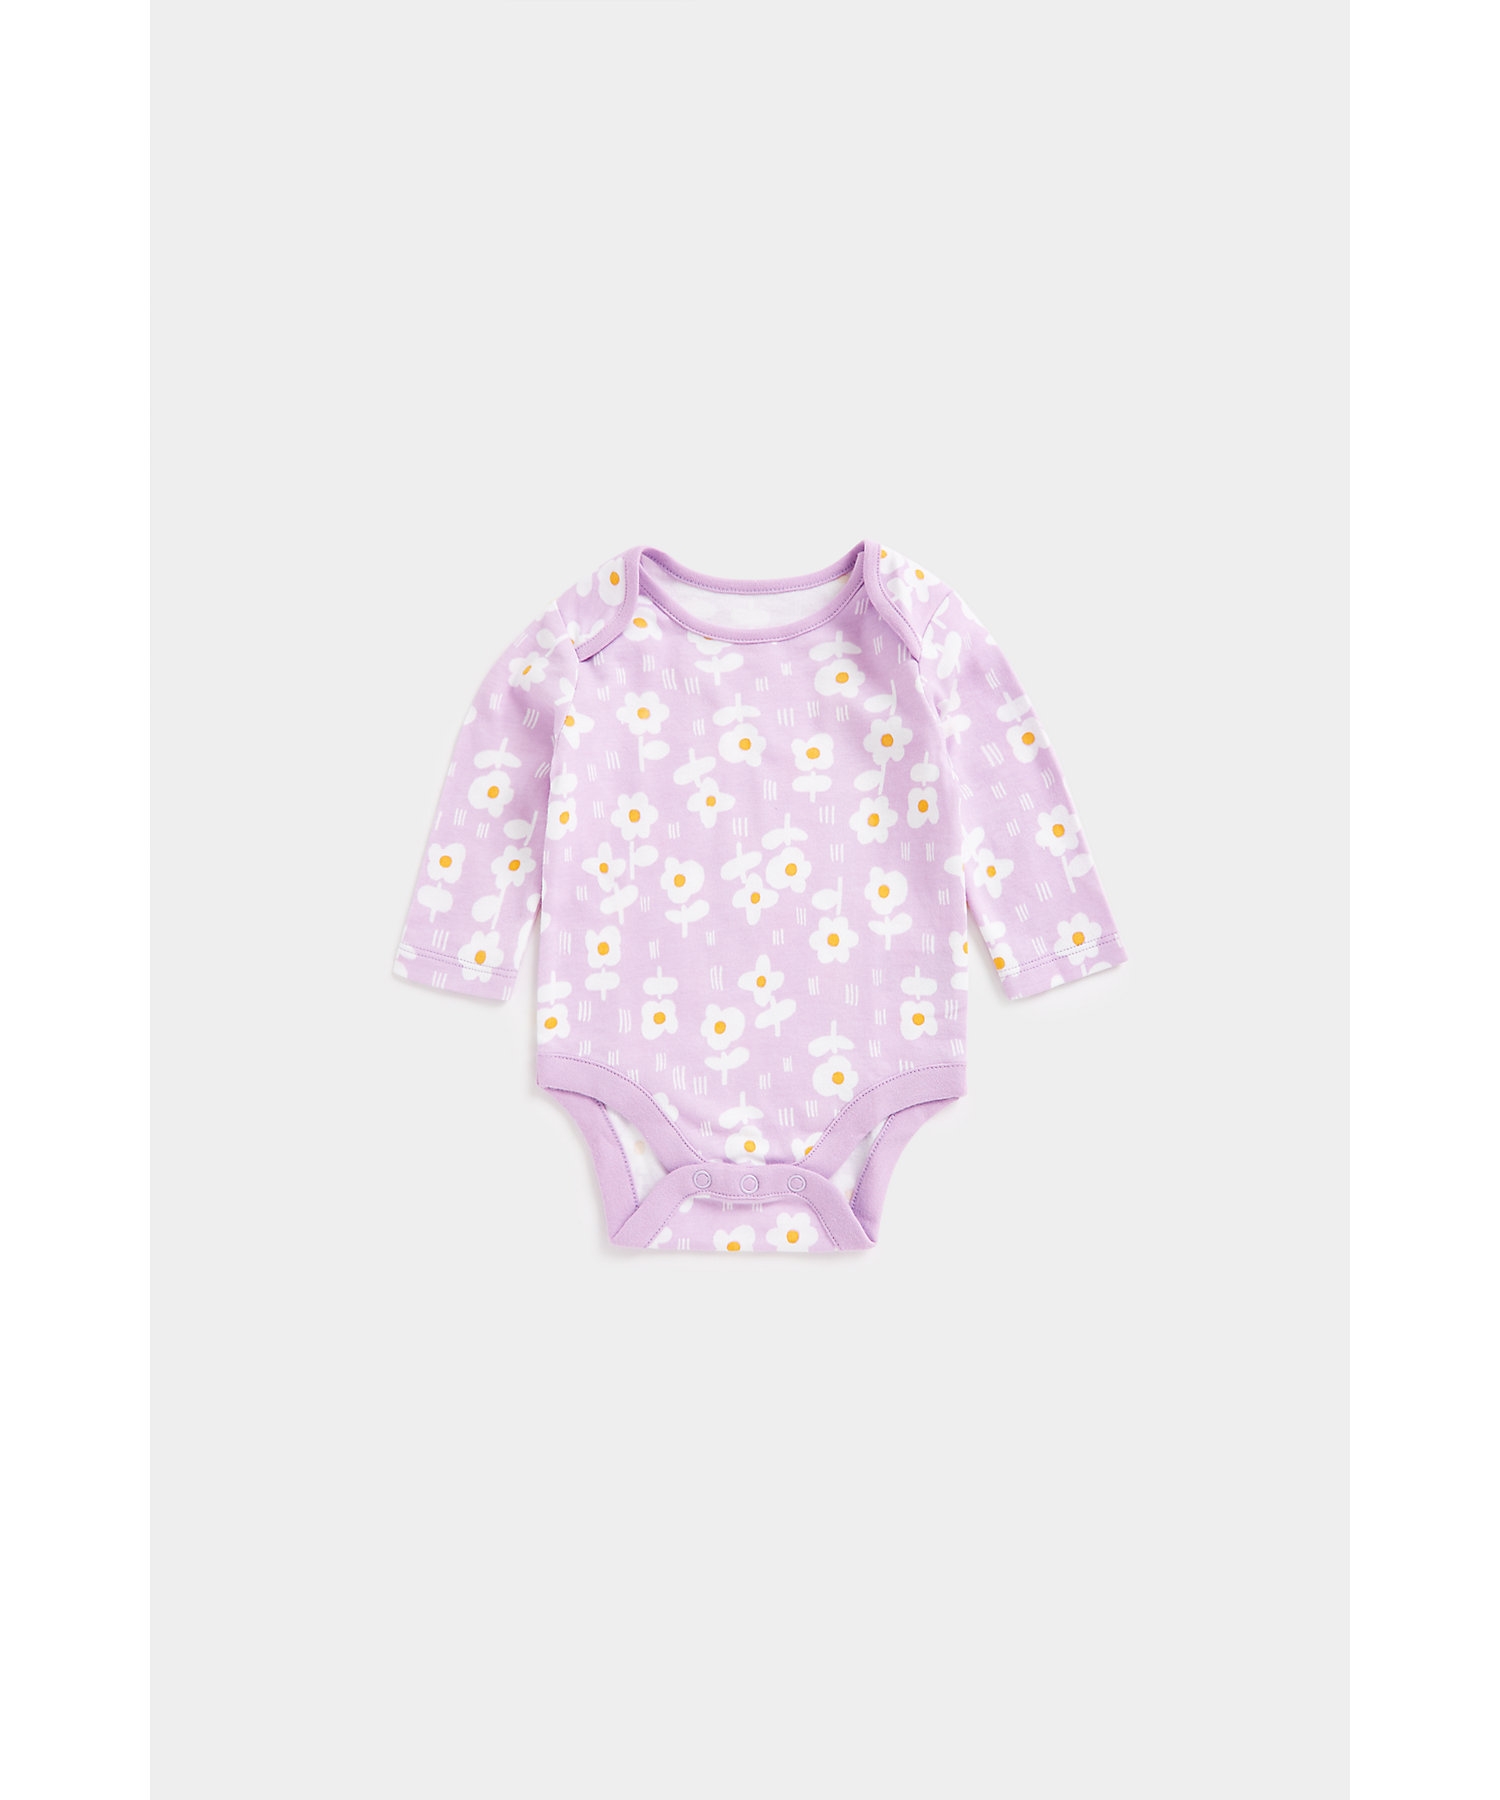 Mothercare | Girls Full Sleeves Bodysuits Fun Colorful Designs-Multicolor 3